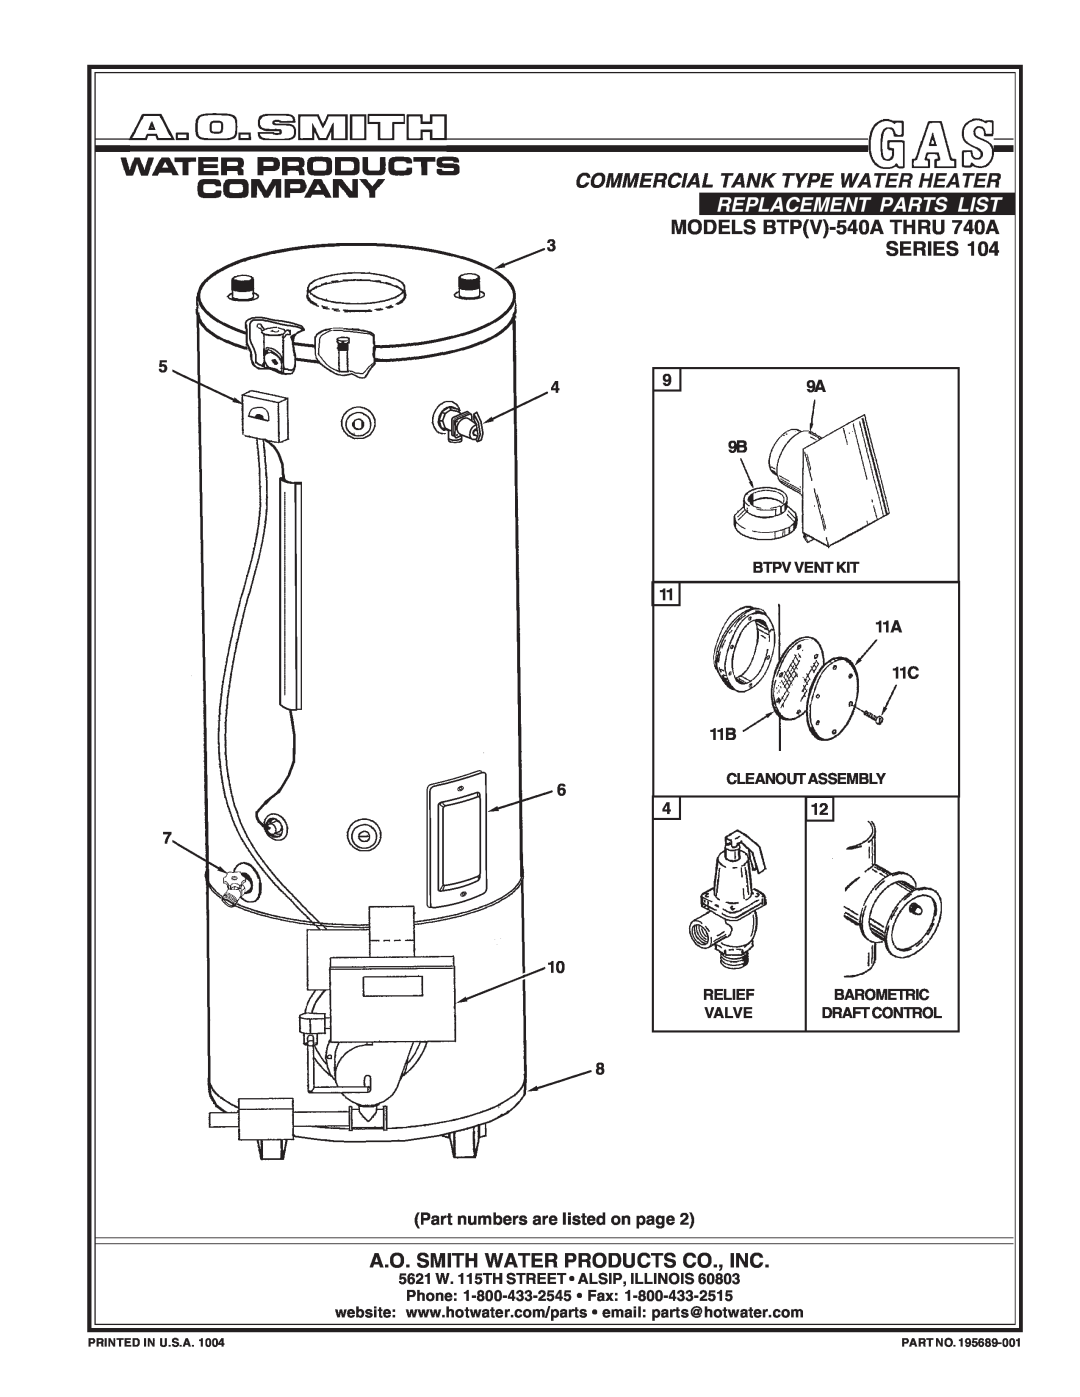 A.O. Smith 104 Series manual A.O. Smith Water Products Co., Inc, Btpv Vent Kit, Cleanout Assembly, Relief, Barometric 